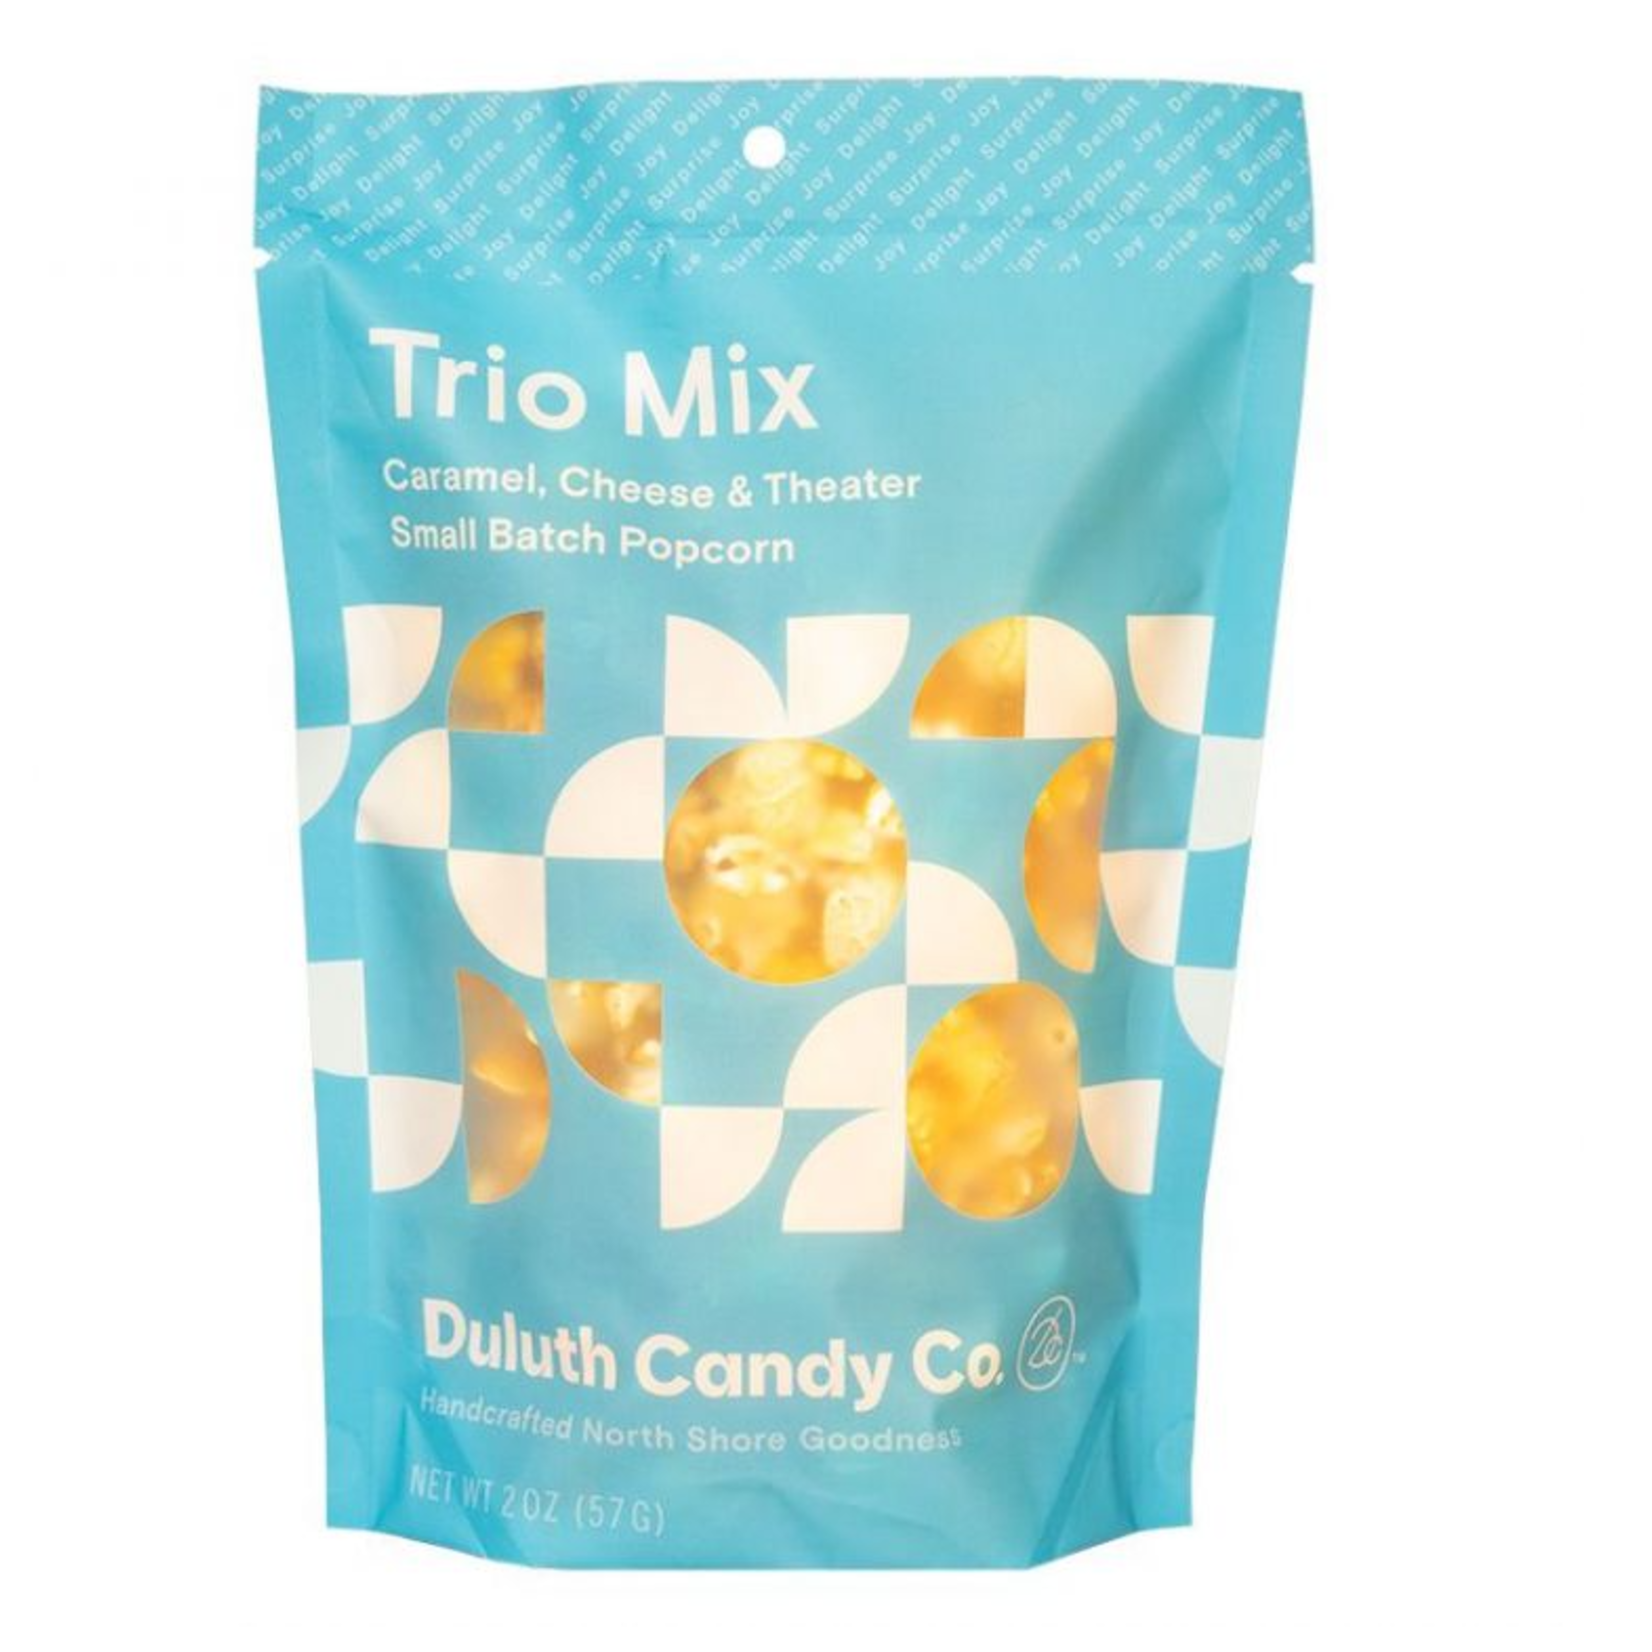 Duluth Candy Co. Trio Mix - 2 Oz. - Duluth Candy Co